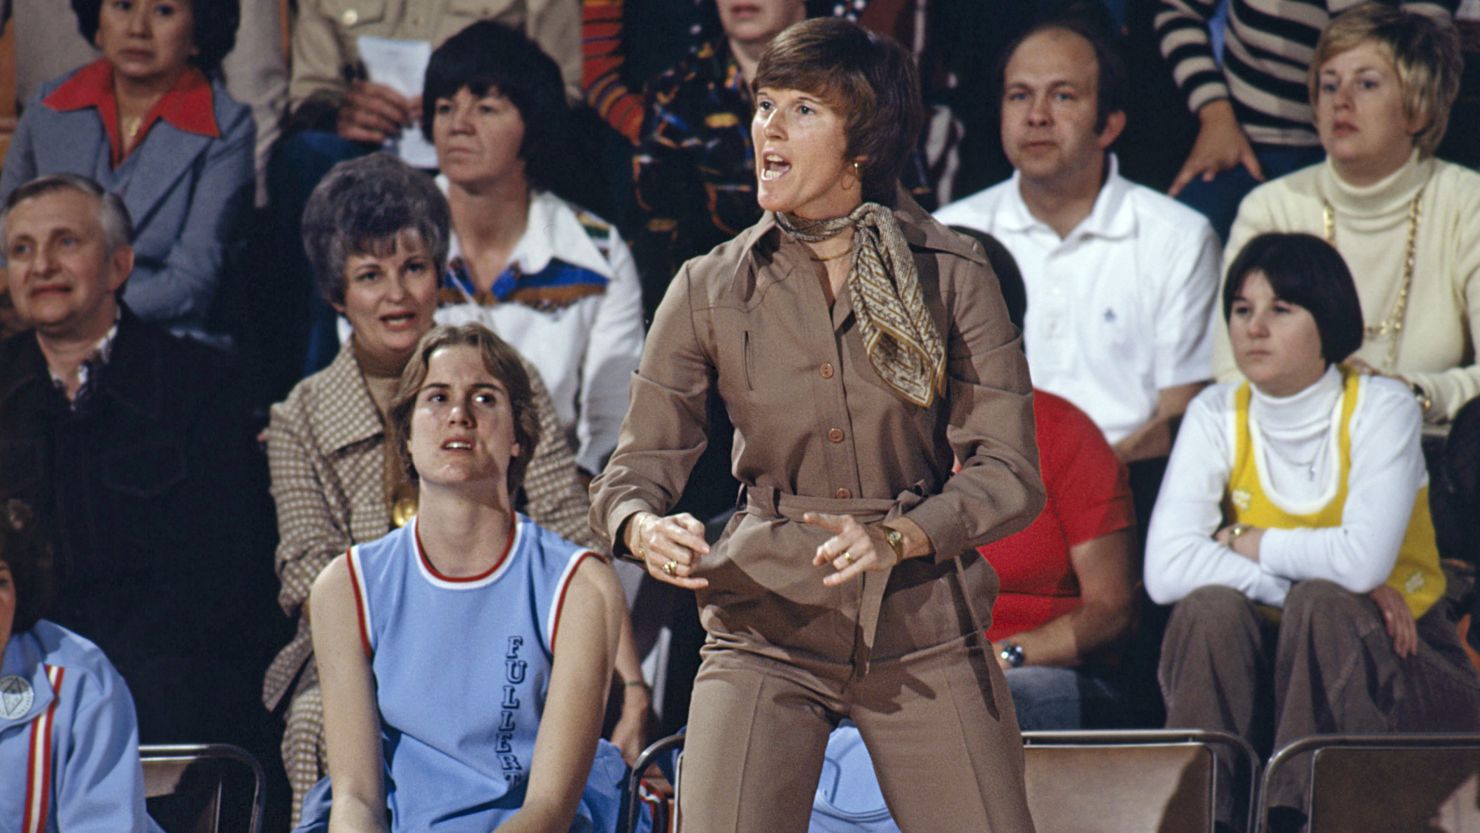 Cal State Fullerton head coach Billie J. Moore on the sidelines of a game in 1977.